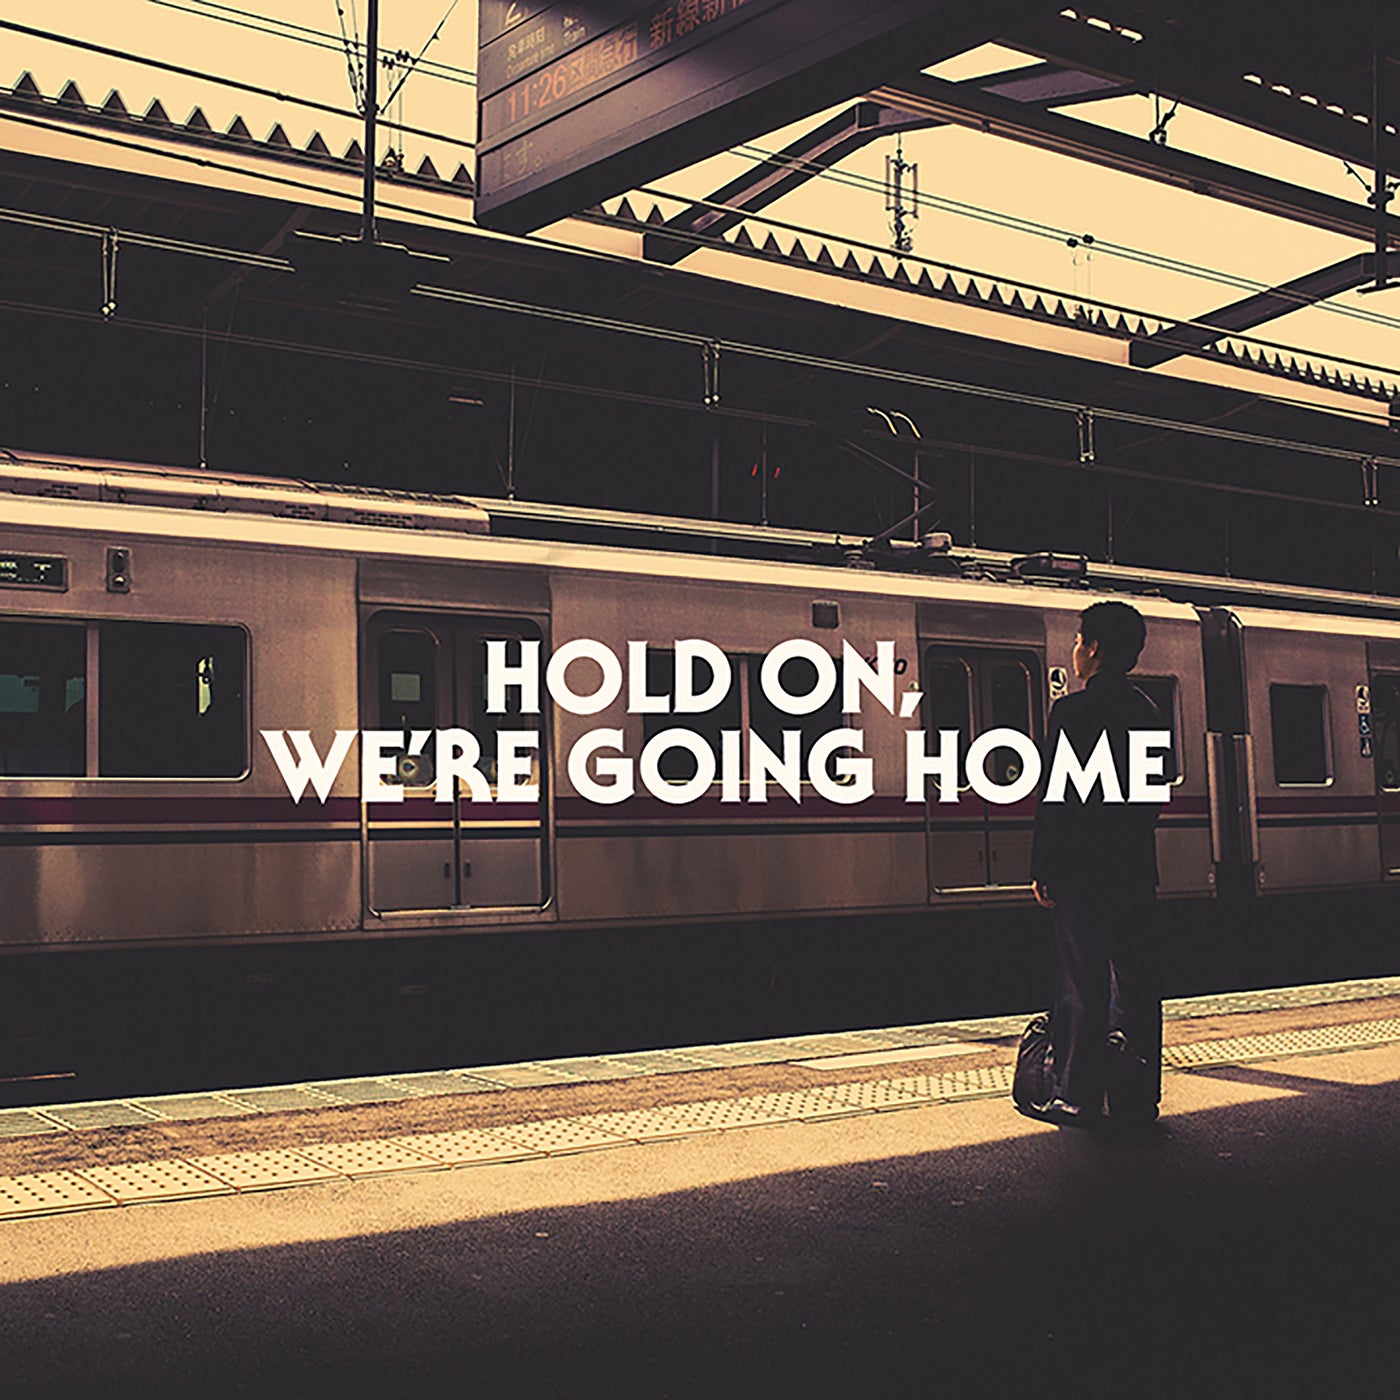 Go home music. Go Home. Going Home. Hold on we’re going Home. Go Home картинка.